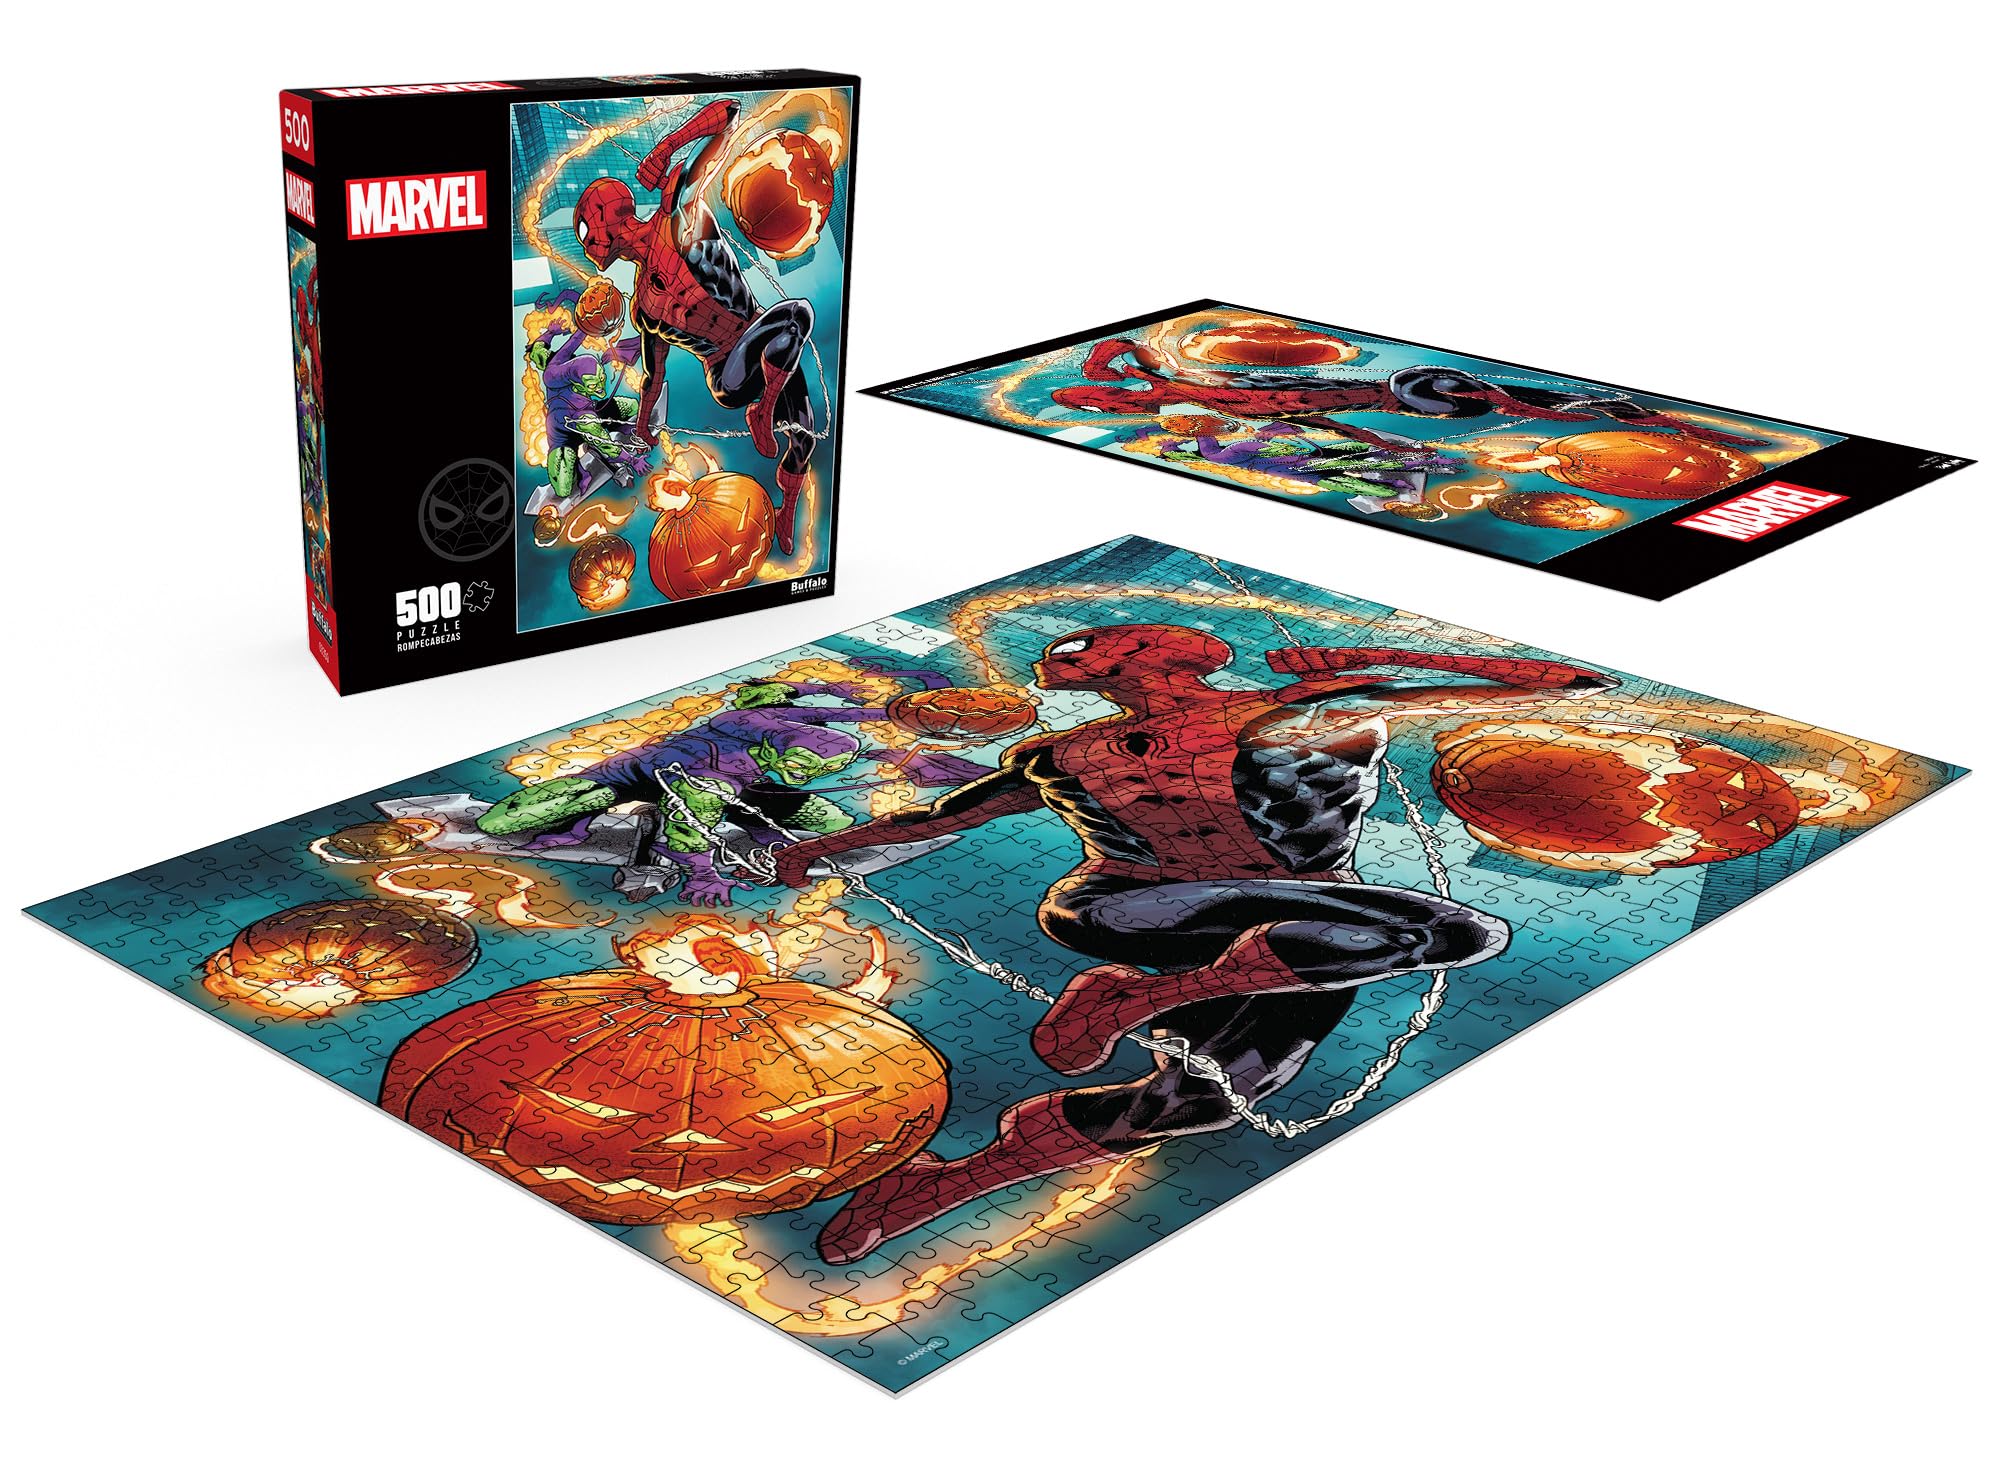 Buffalo Games - Marvel - Spider-Man vs. Green Goblin - 500 Piece Jigsaw Puzzle for Adults Challenging Puzzle Perfect for Game Nights - Finished Size 21.25 x 15.00